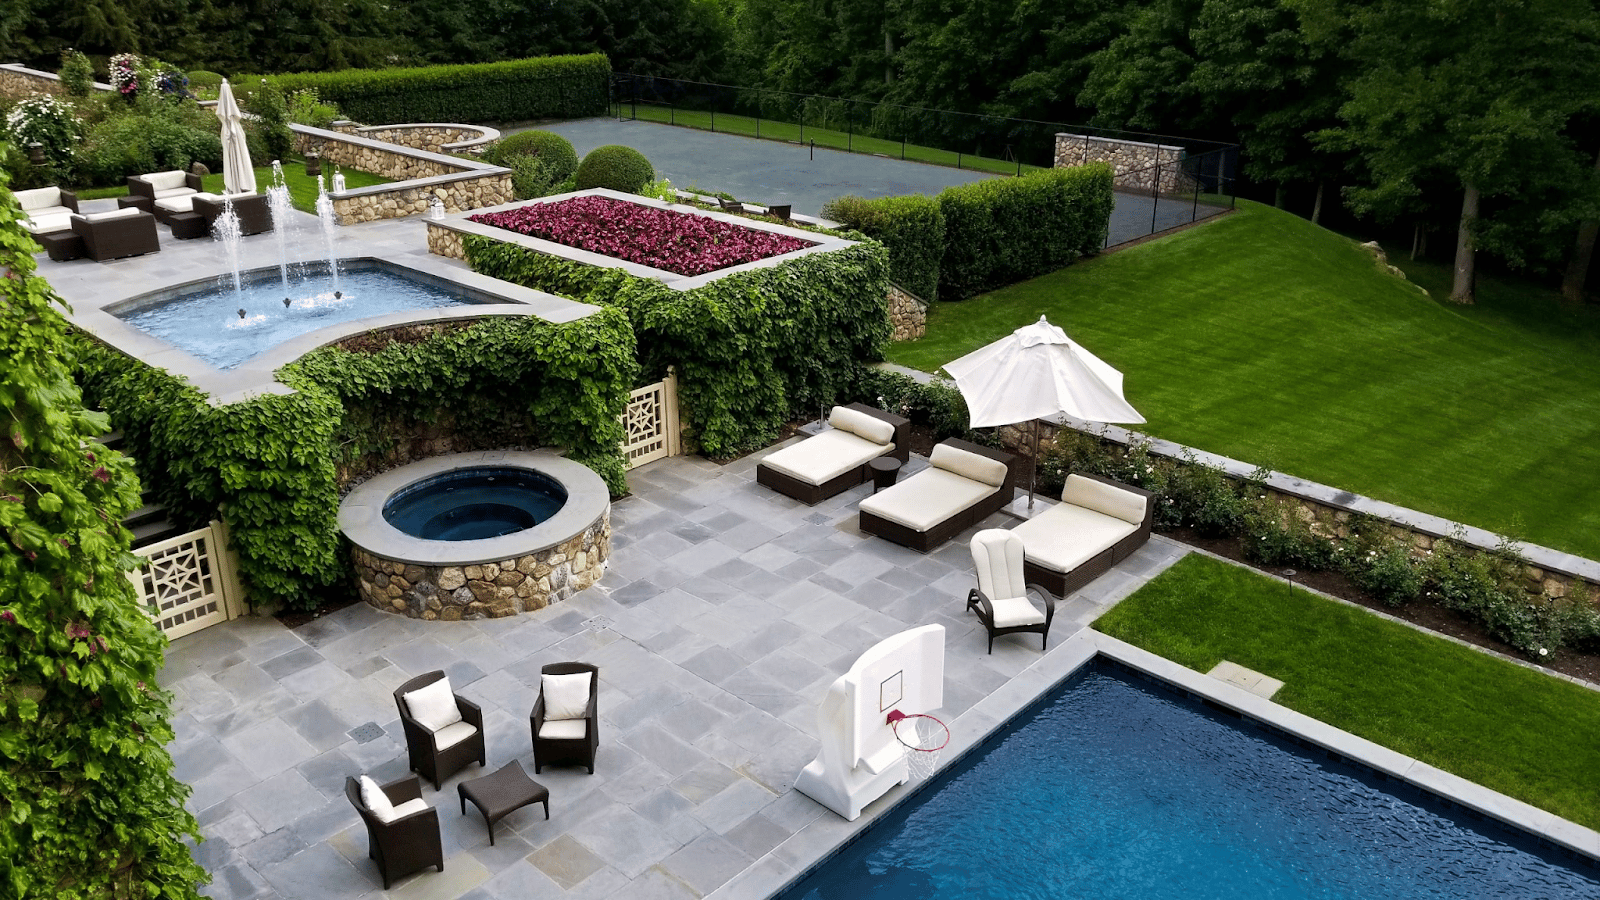 Pool, fountain, firepit and outdoor seating